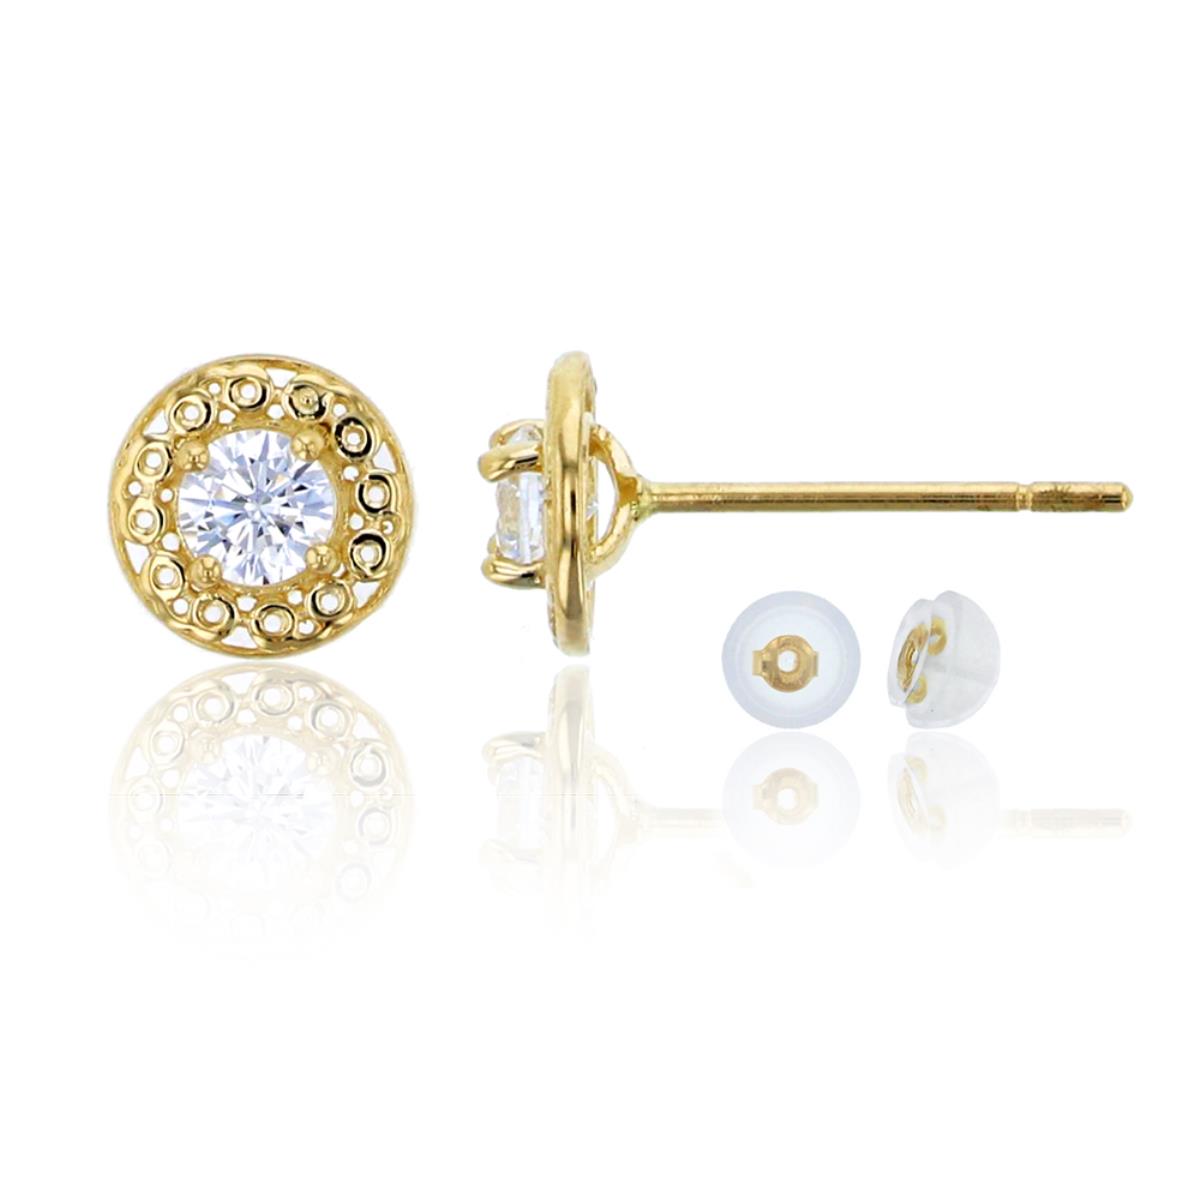 14K Yellow Gold 3mm Round Cut CZ Filigree Stud Earring & 14K Silicone Back